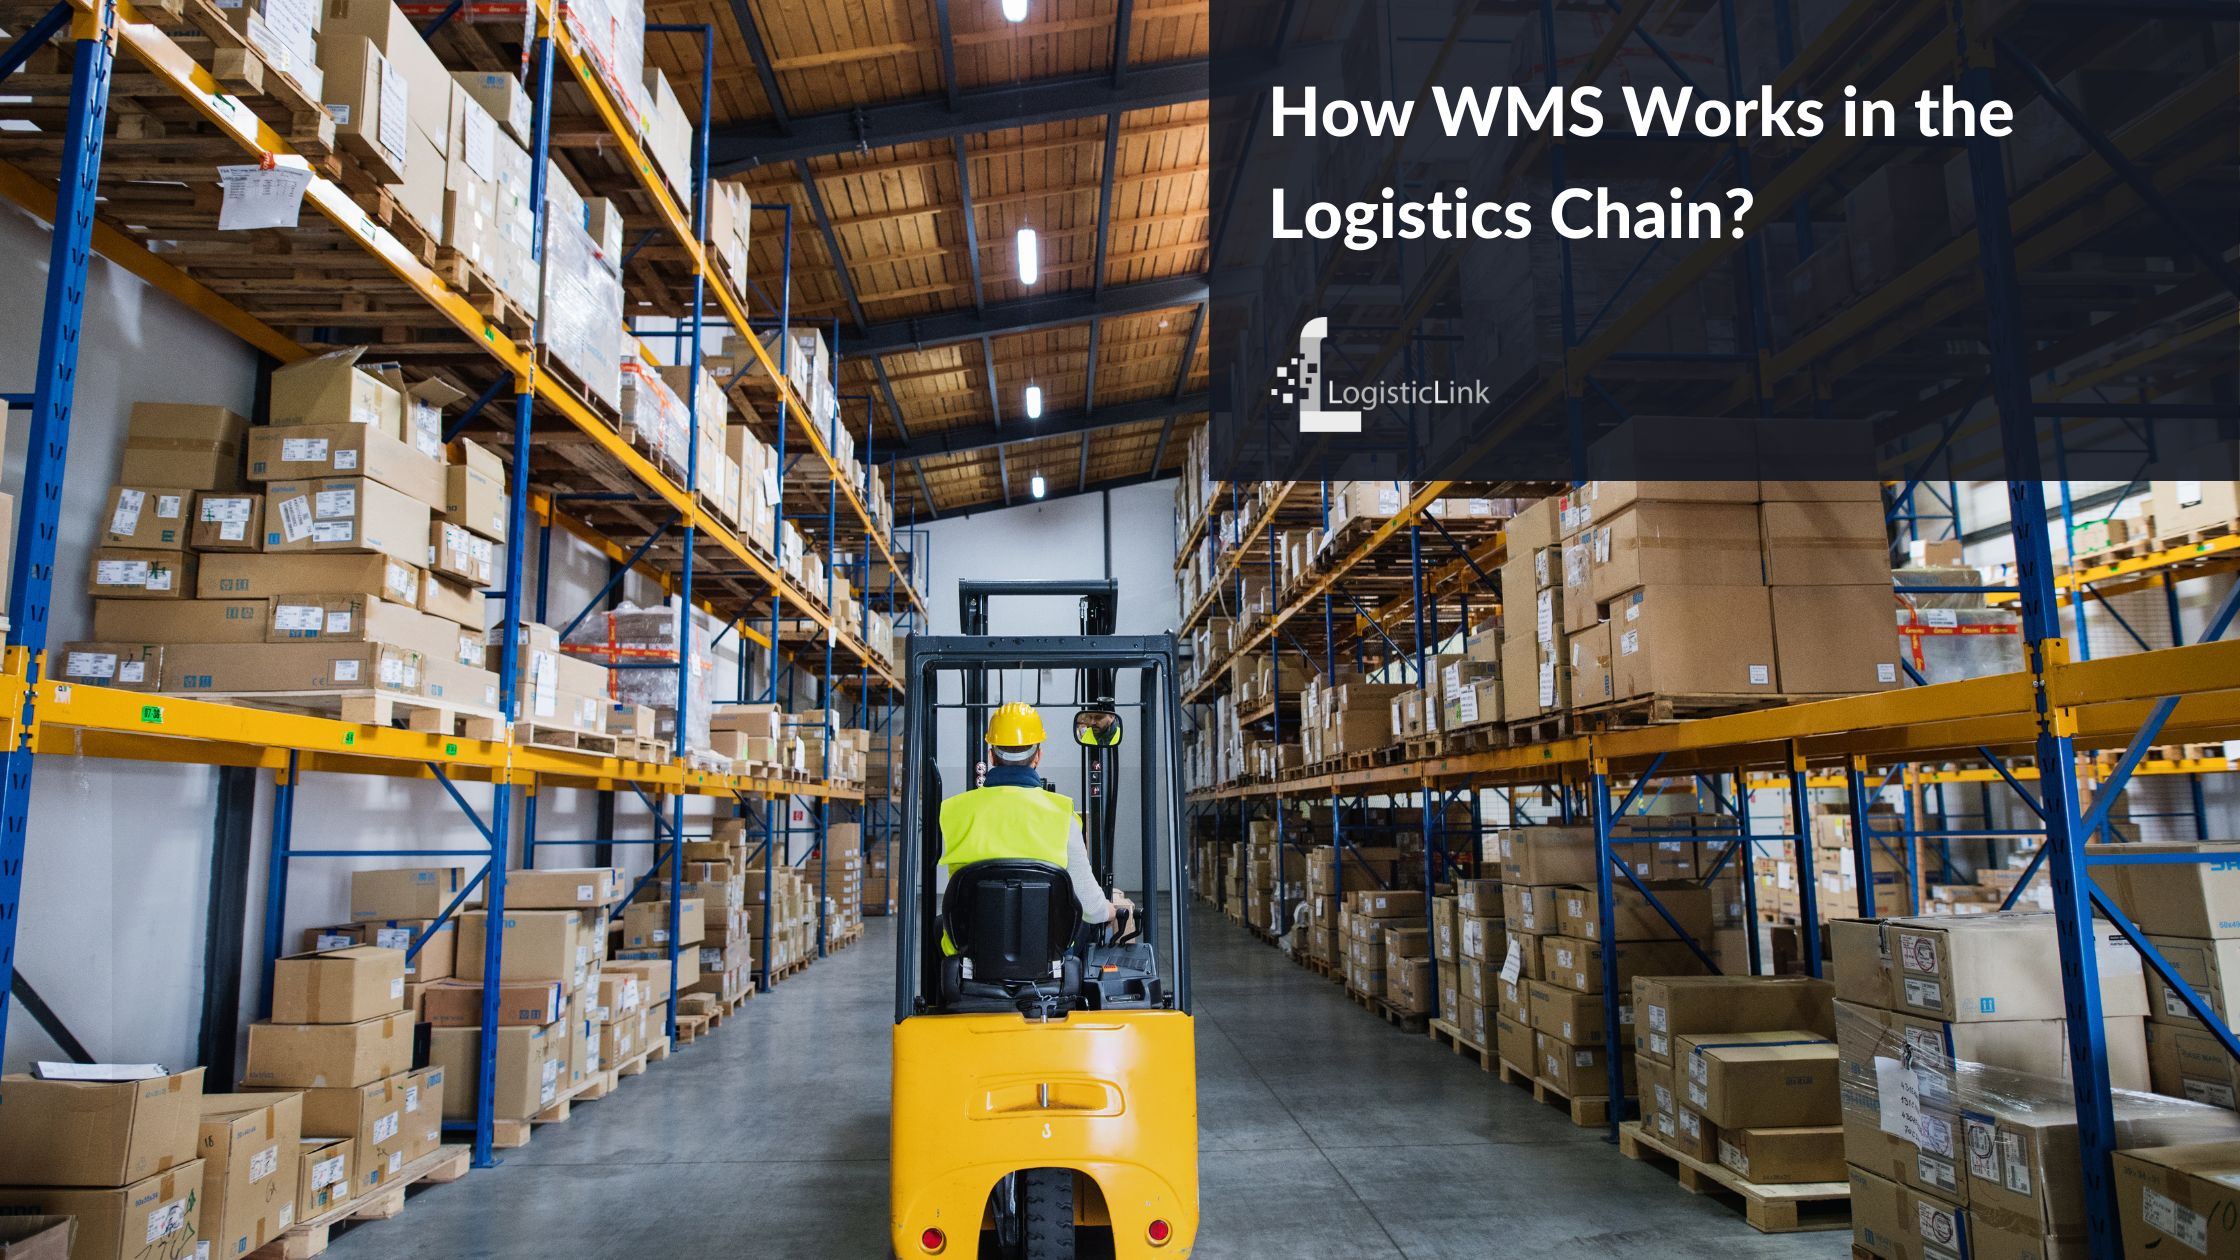 WMS Works in the Logistics Chain